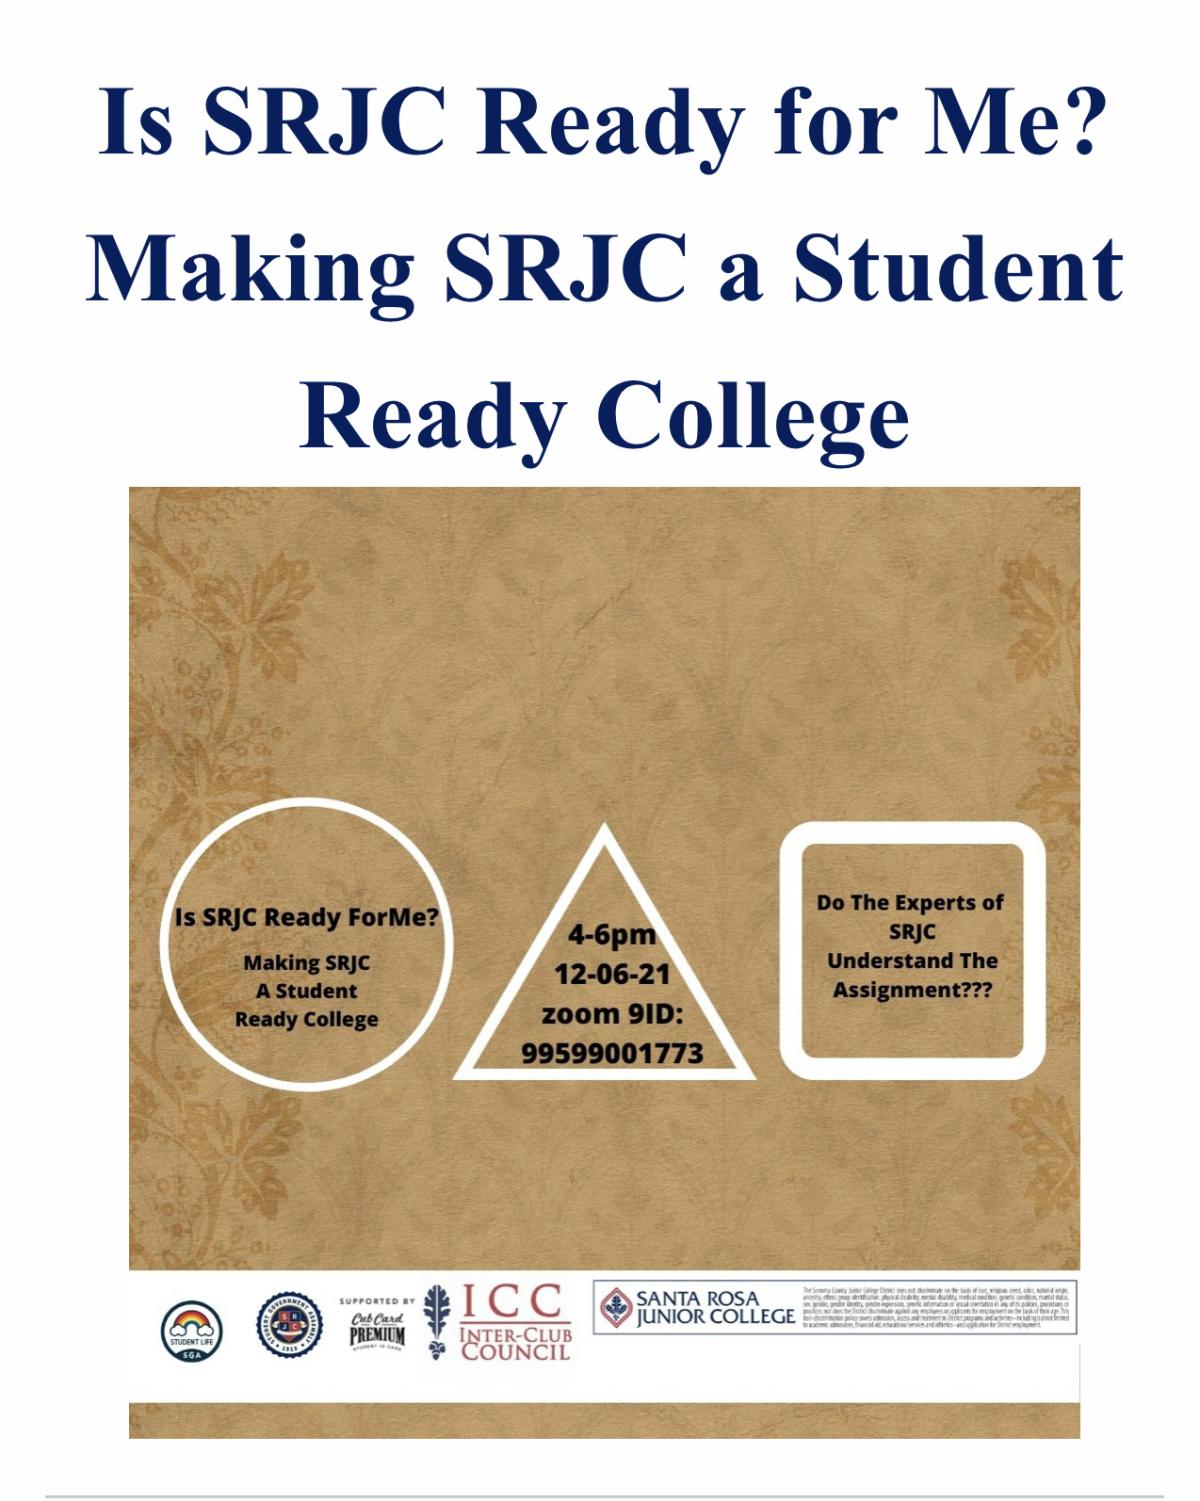 Srjc Academic Calendar 2022 Sga Asks Srjc Student Groups If The Campus Is Student-Ready - The Oak Leaf